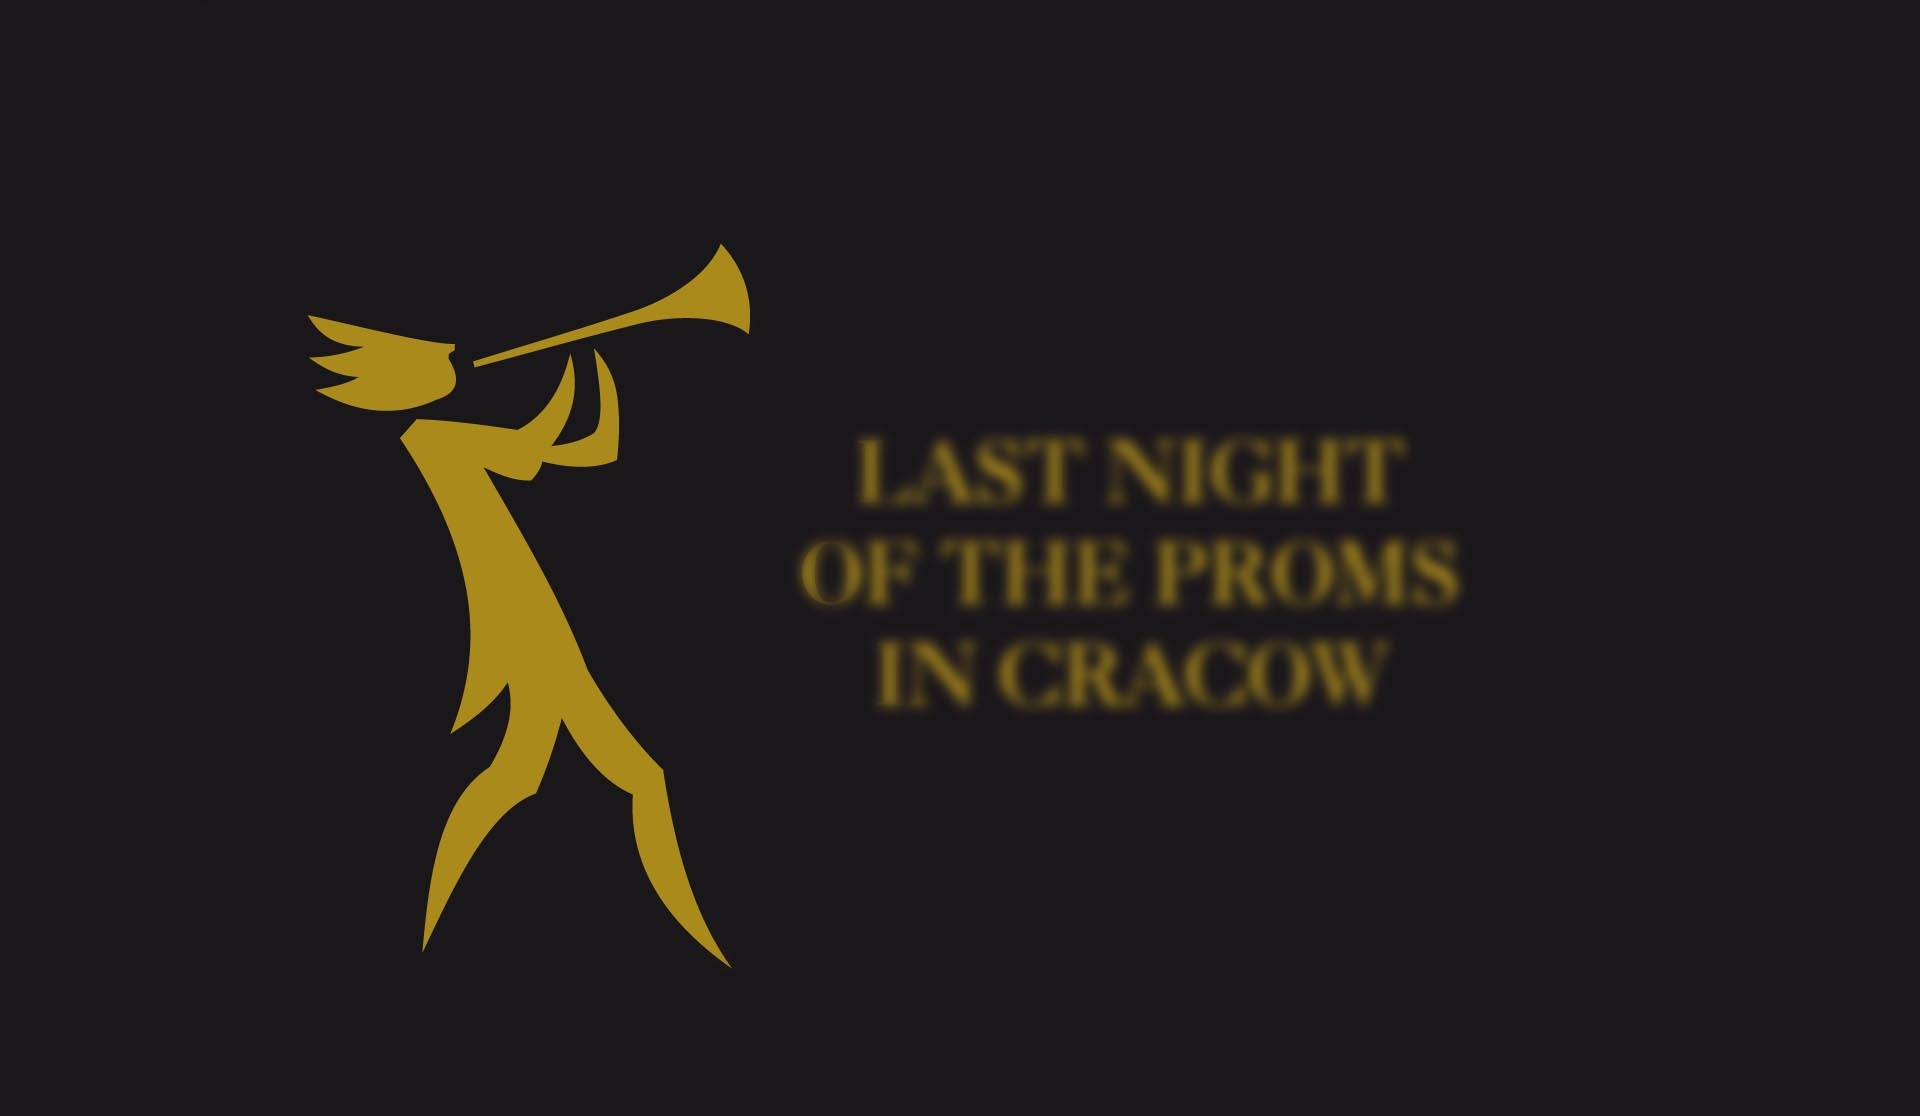 21.09.2019 – 24 LAST NIGHT of the PROMS in CRACOW